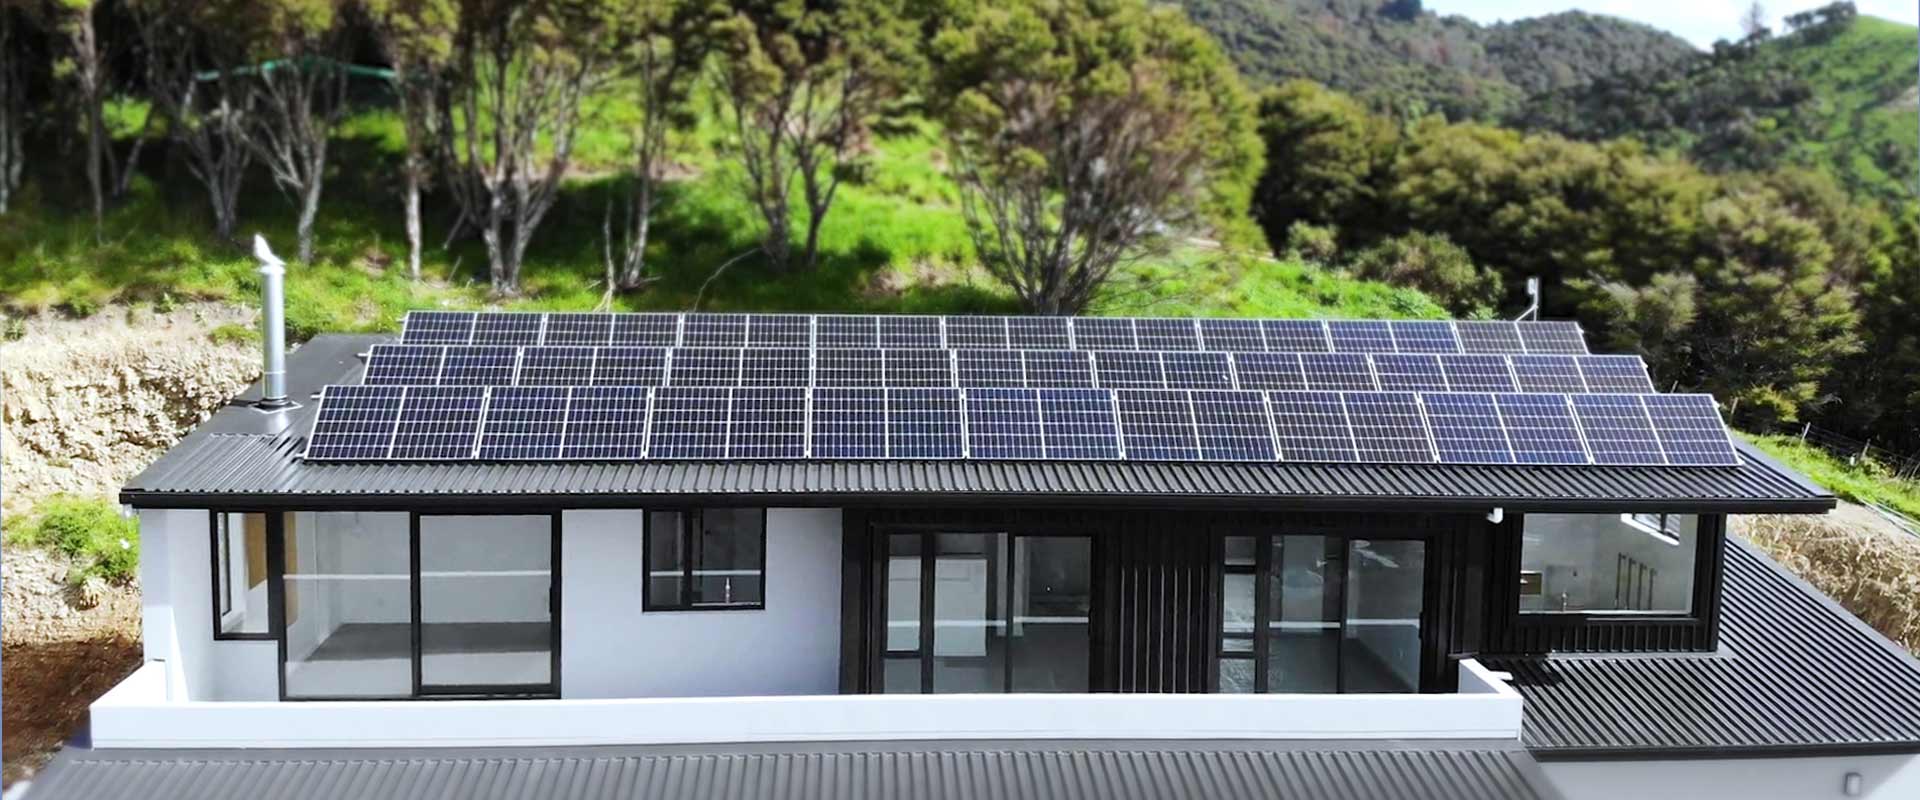 Solar power for your off-grid property